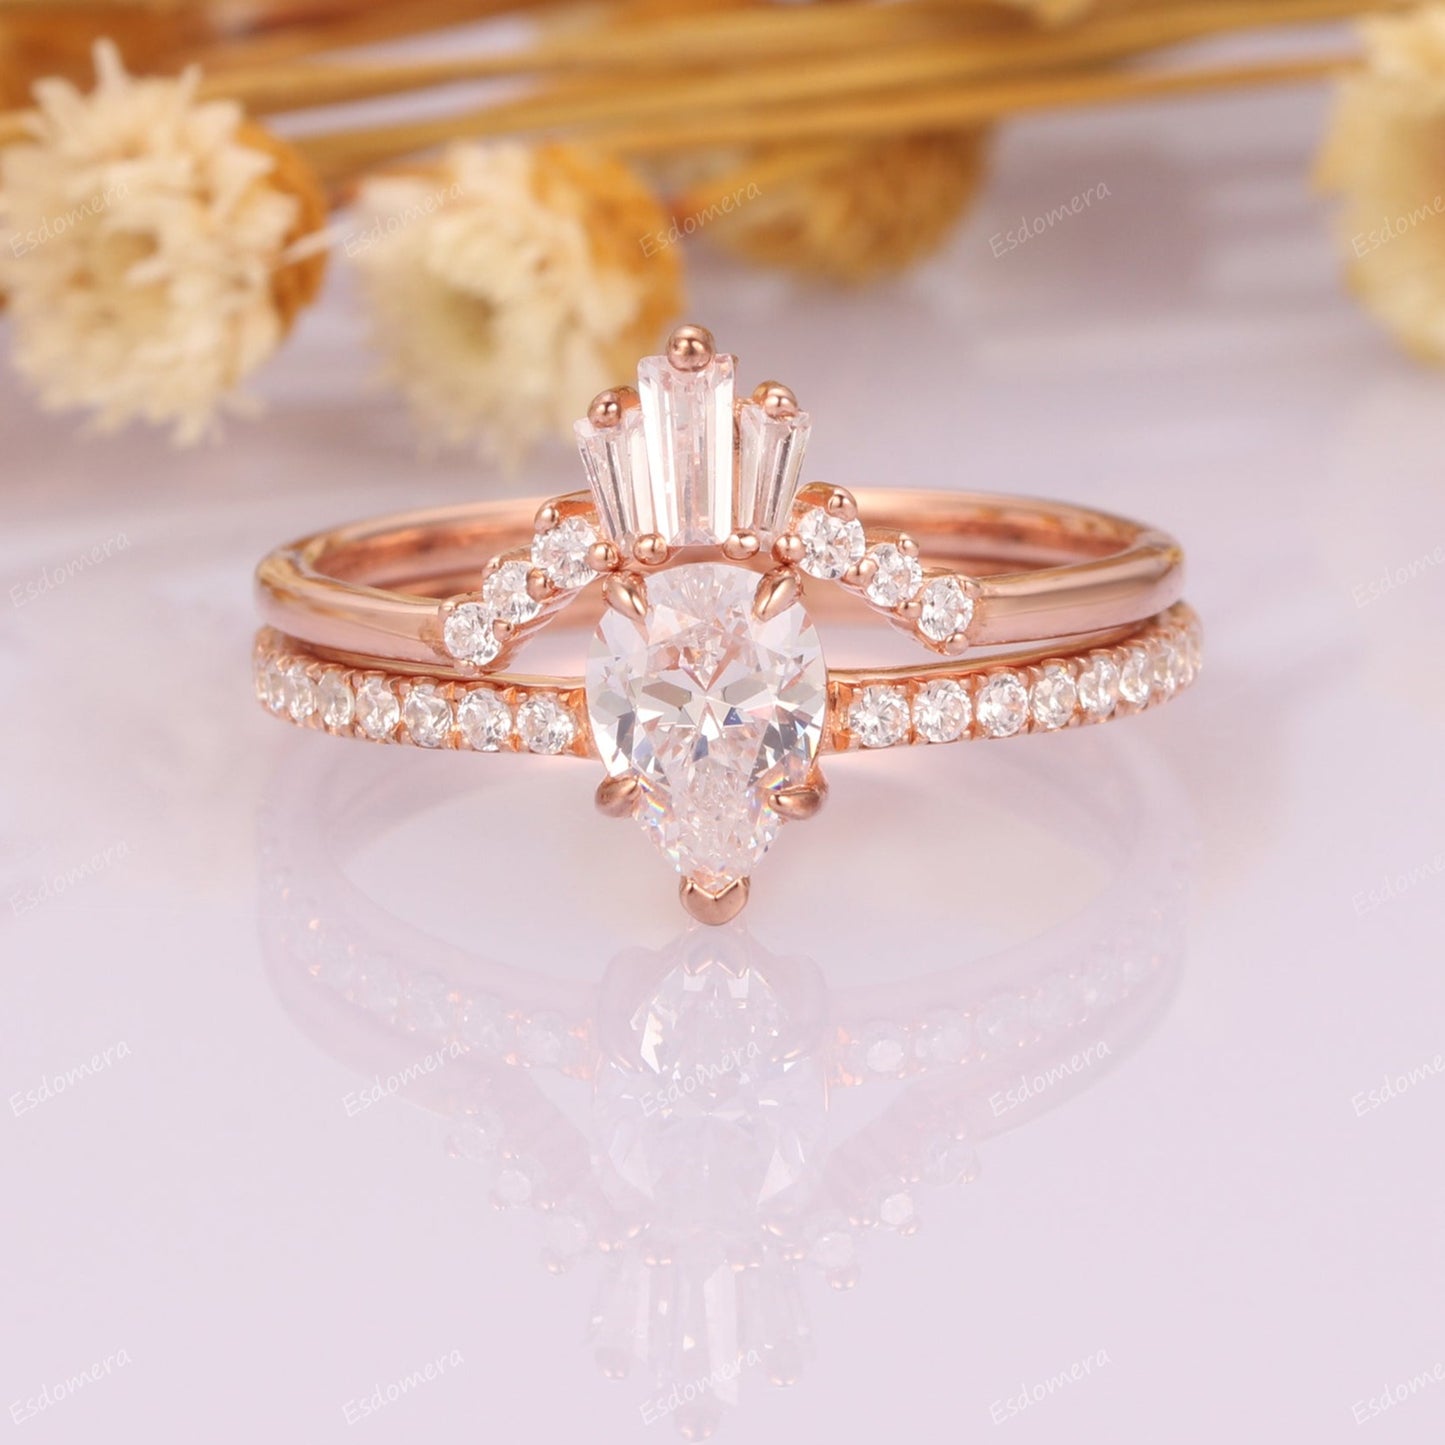 2pcs 14k Rose Gold Wedding Sets, Vintage 5x7mm Pear Cut Moissanite Engagement Ring For Her, Art Deco 0.37ctw Moissanites Curved Wedding Band